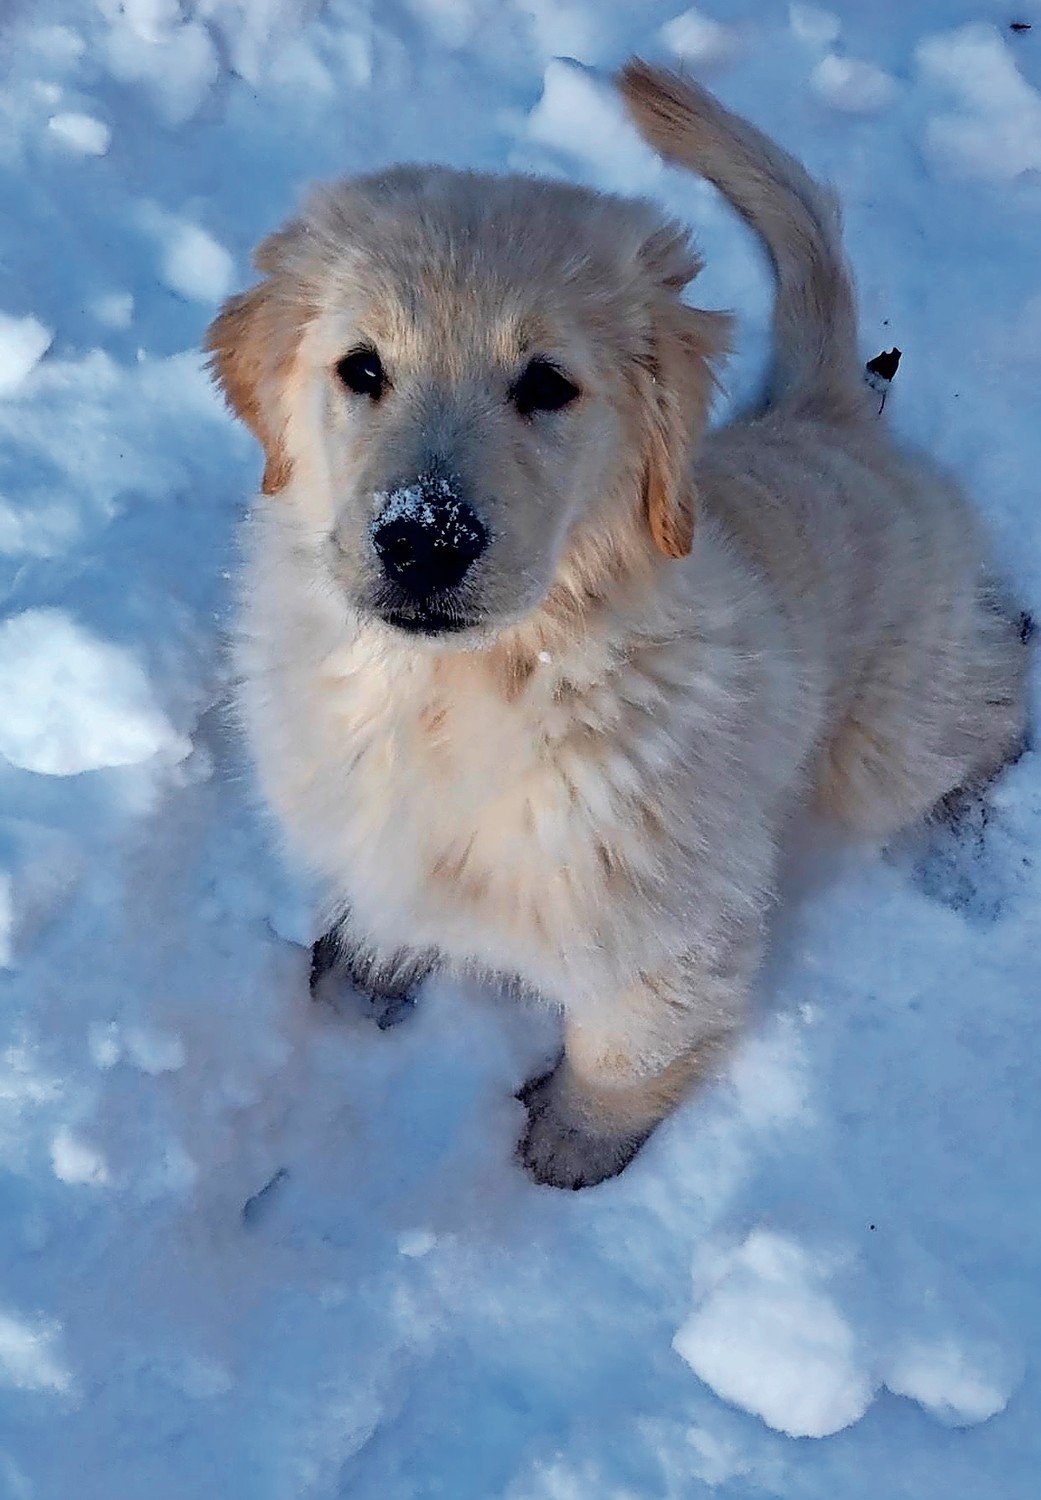 Oakley, a 3-month golden retriever puppy, was happy to sniff around in the snow in Wantagh.